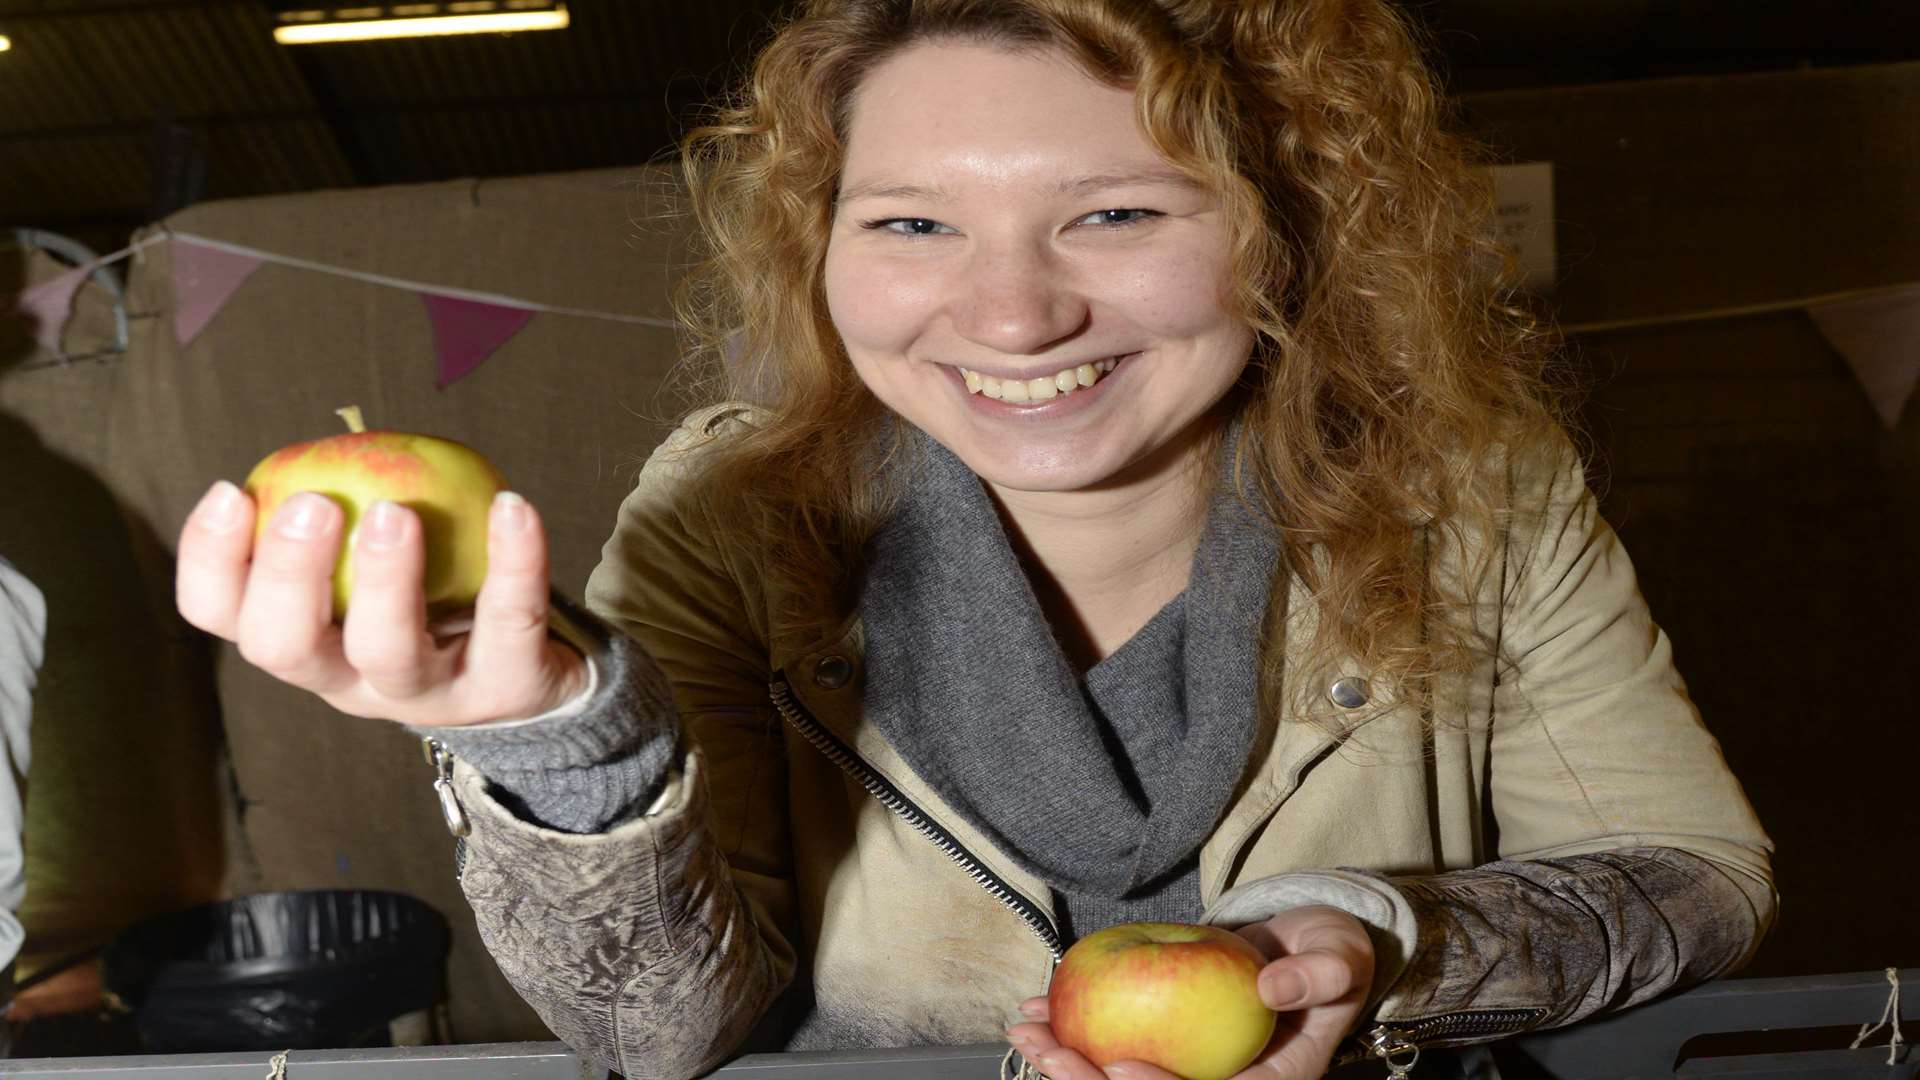 Zuzanna Nowak helped out at last year's National Apple Festival